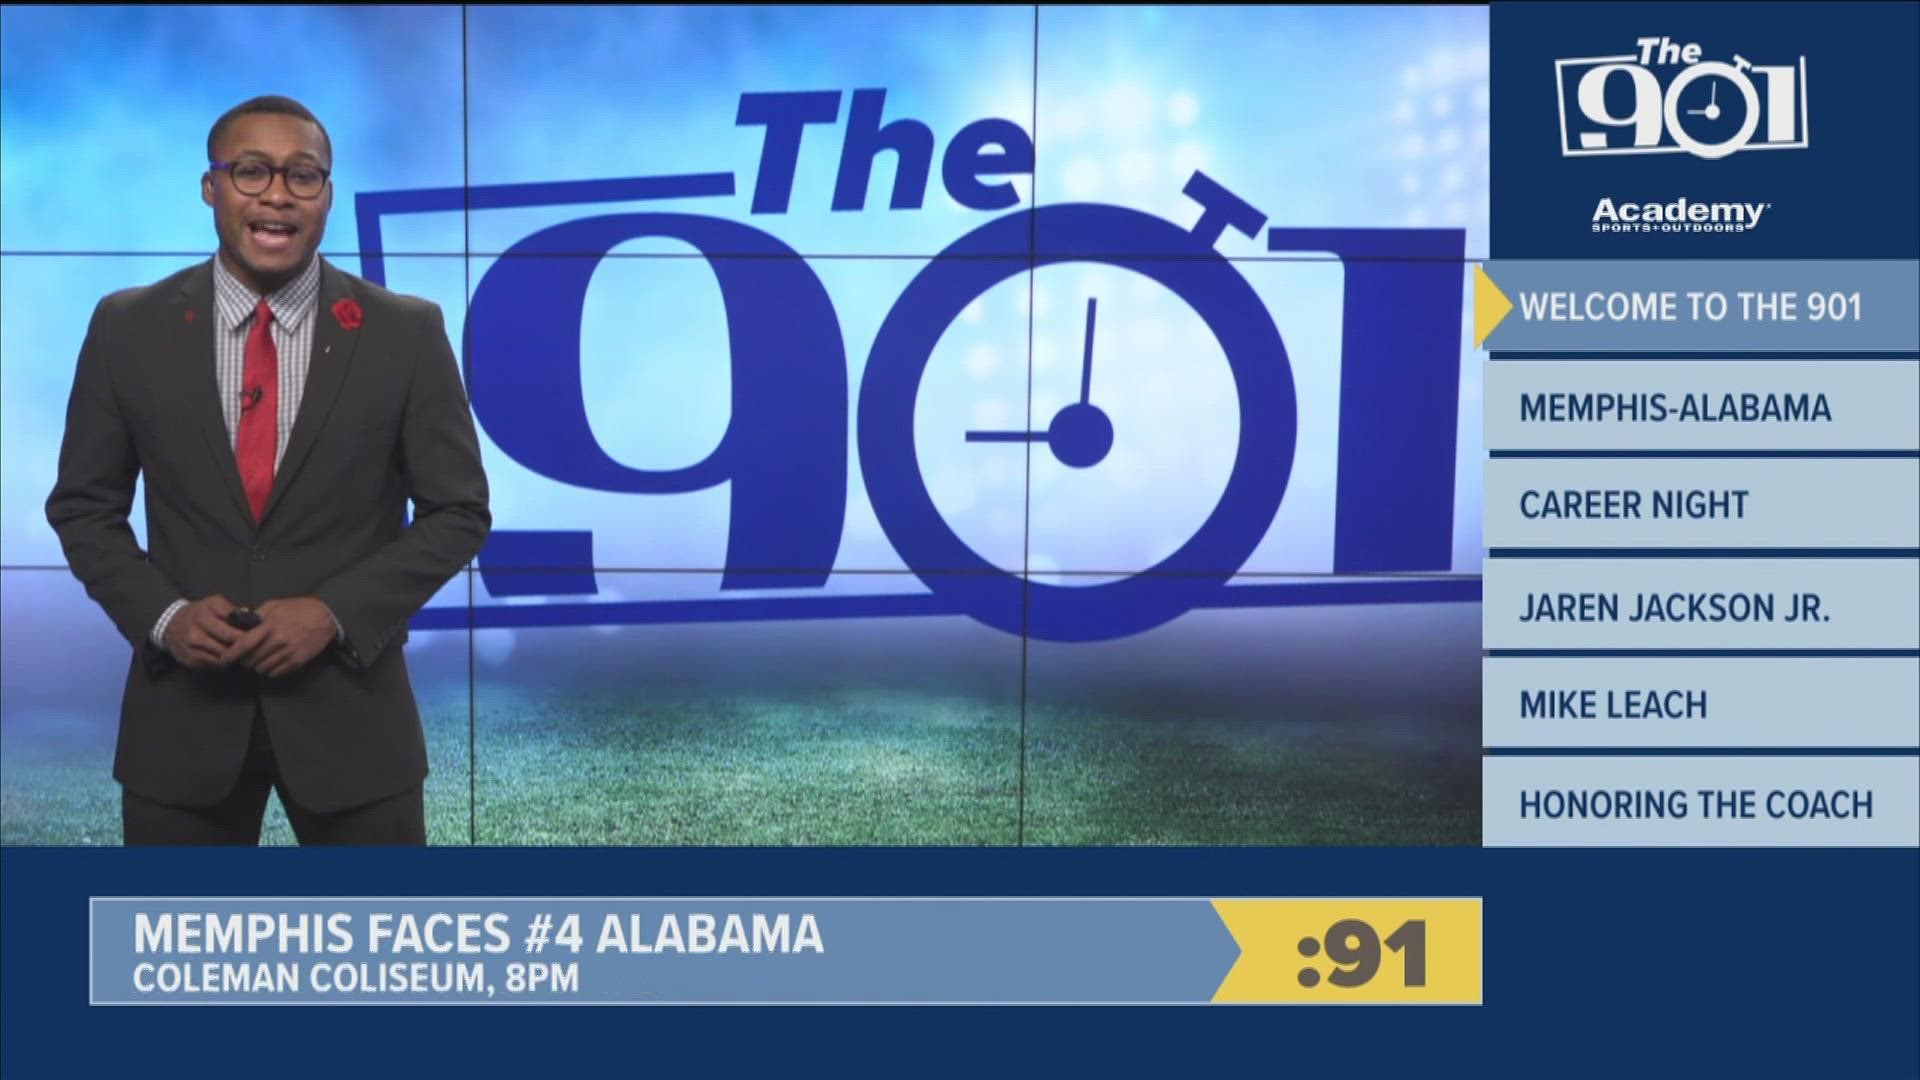 Avery Braxton gets you up to speed on everything Memphis sports in Tuesday's episode of The 901.